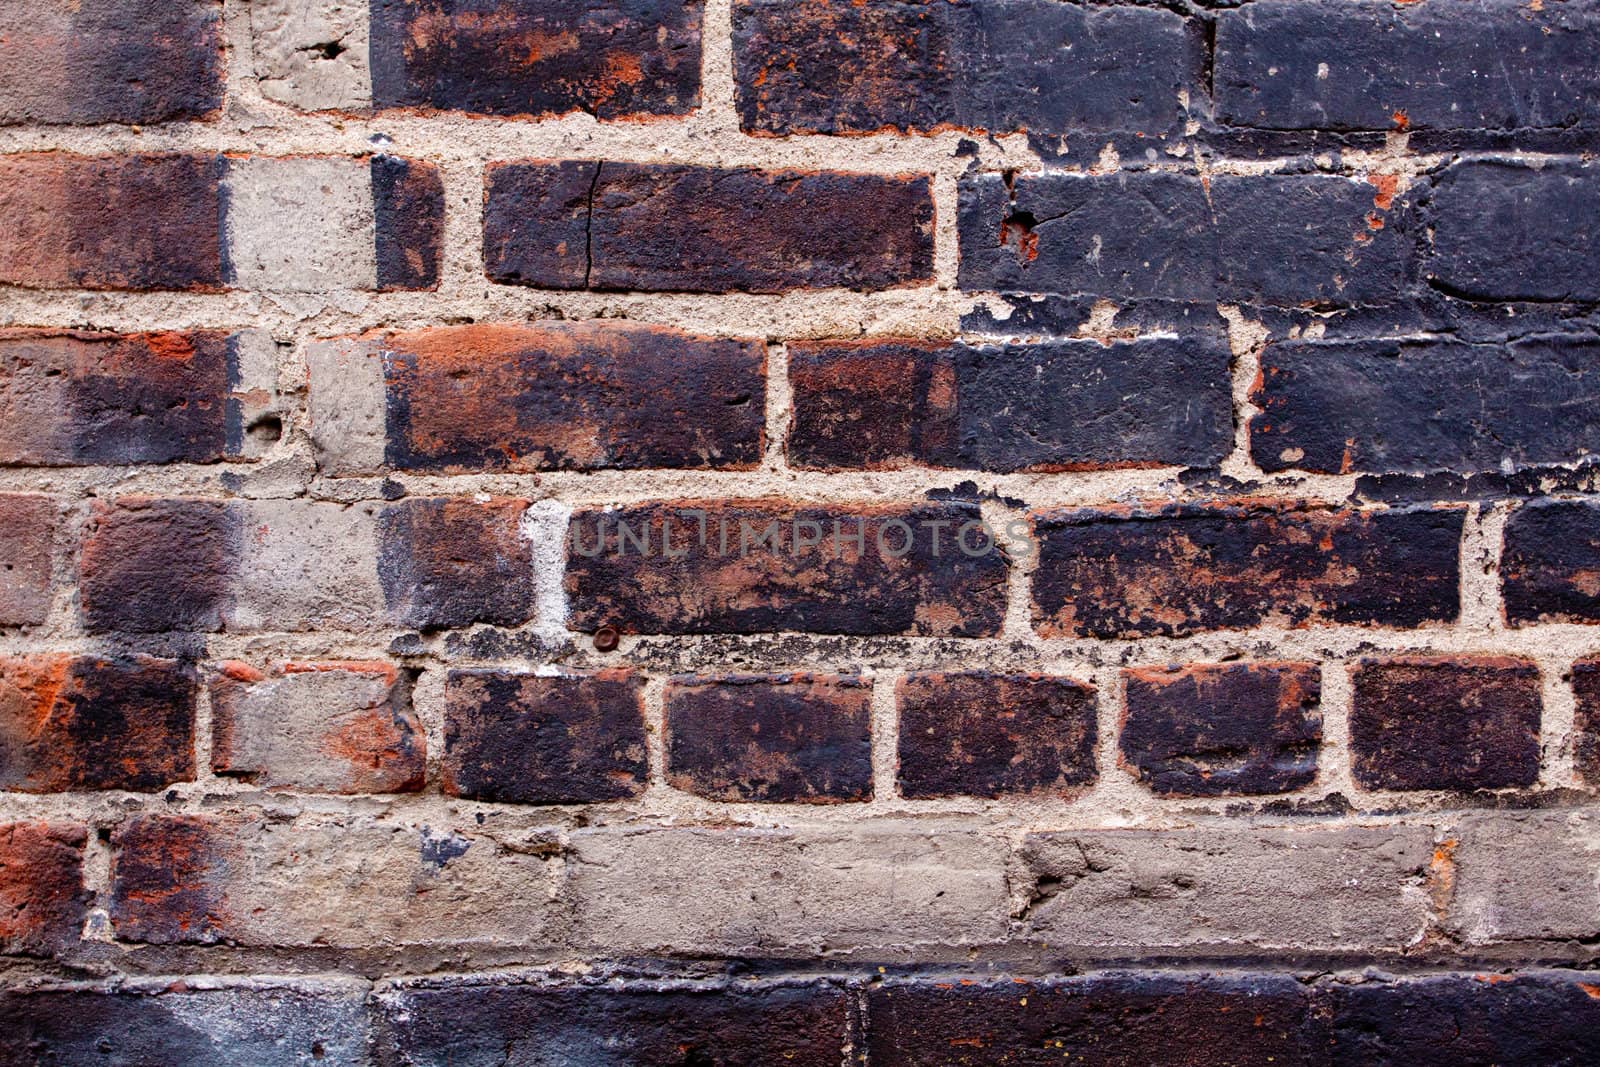 Old bricks are decaying and falling apart on this interesting textured background image.